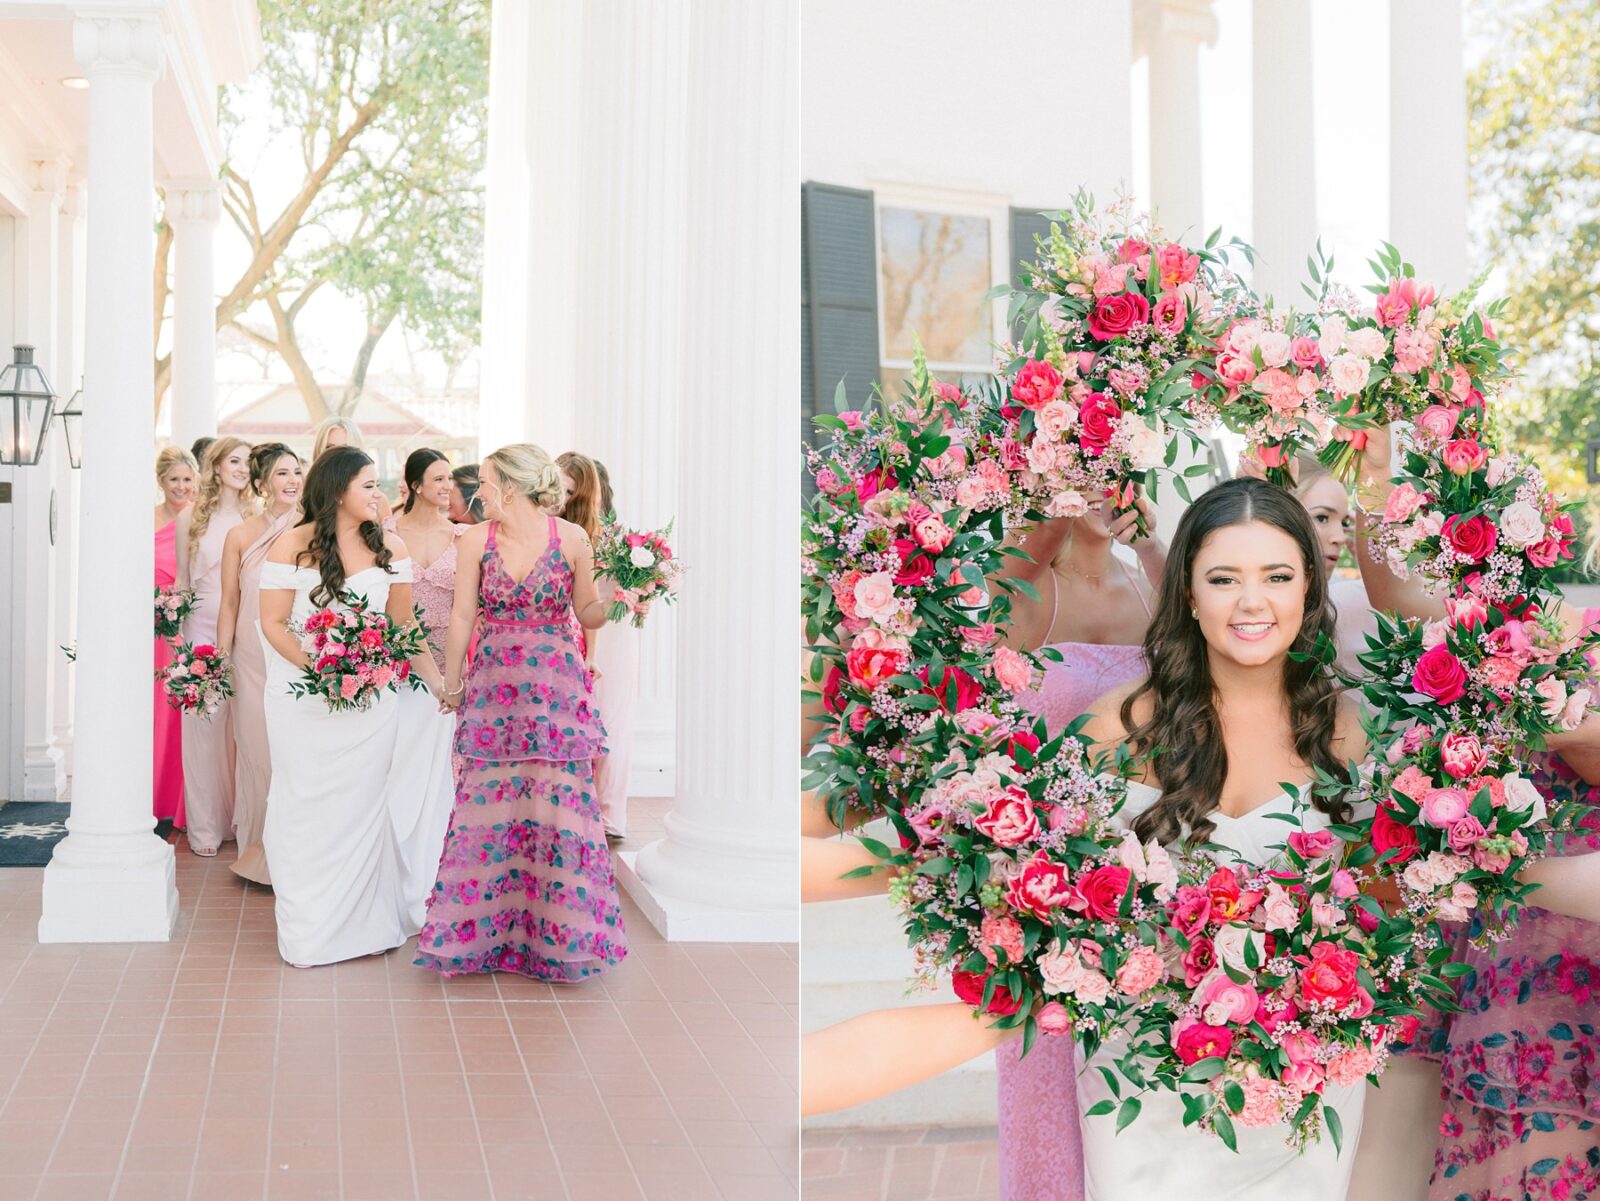 coordinating pink bridesmaid dresses, flower bouquets in circle around bride's head, con flower designs, pink wedding flowers, pink wedding bouquet, wedding at Woodbine mansion in round rock texas, wedding photos by Tara Lyons Photography, planning by The event shop